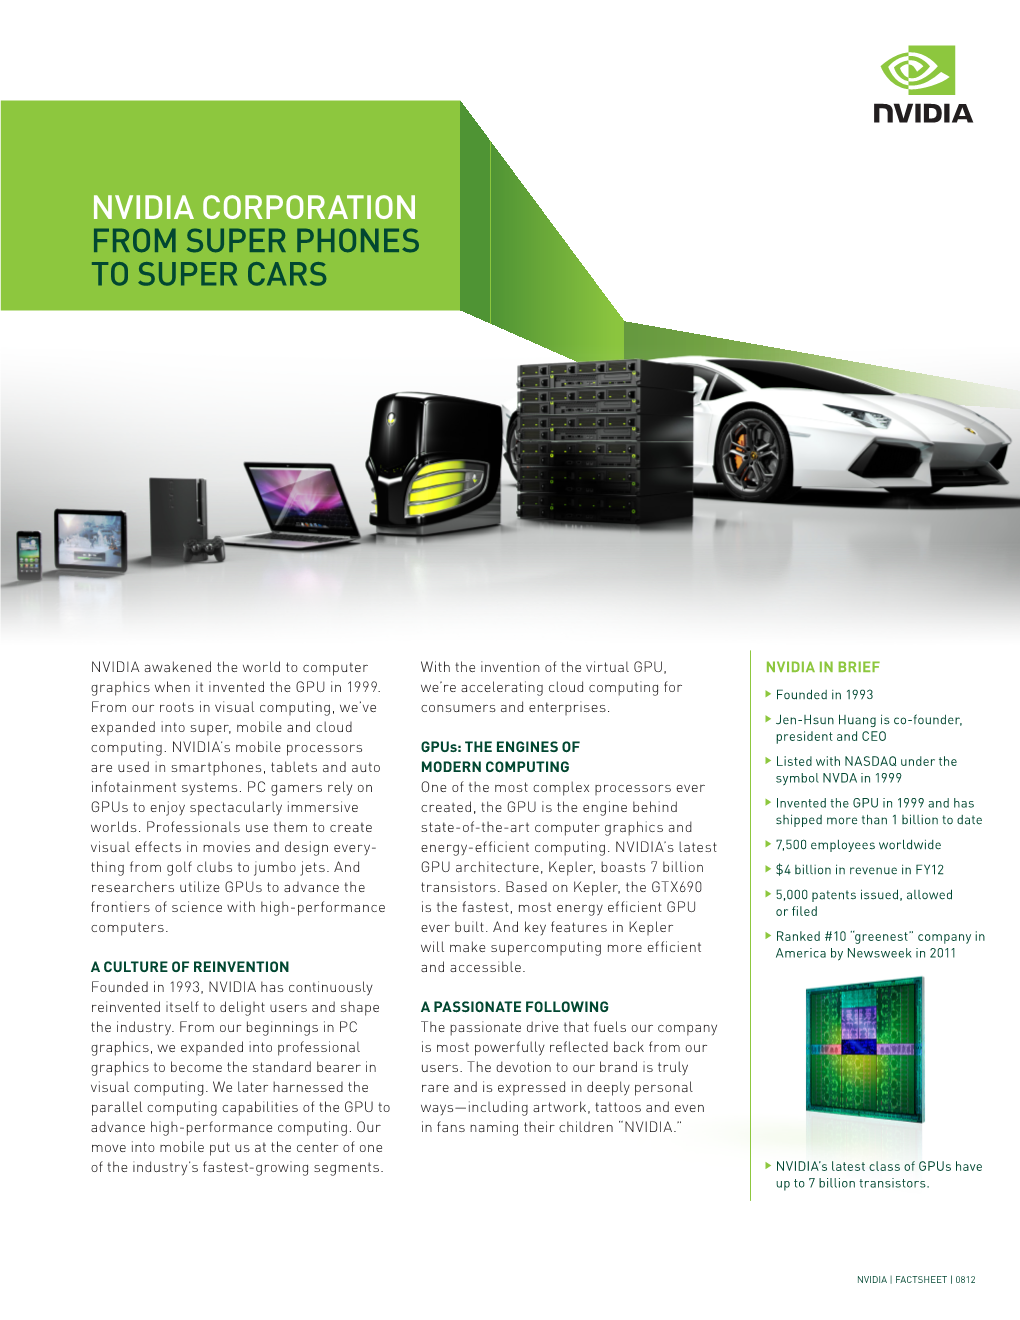 Nvidia Corporation from Super Phones to Super Cars